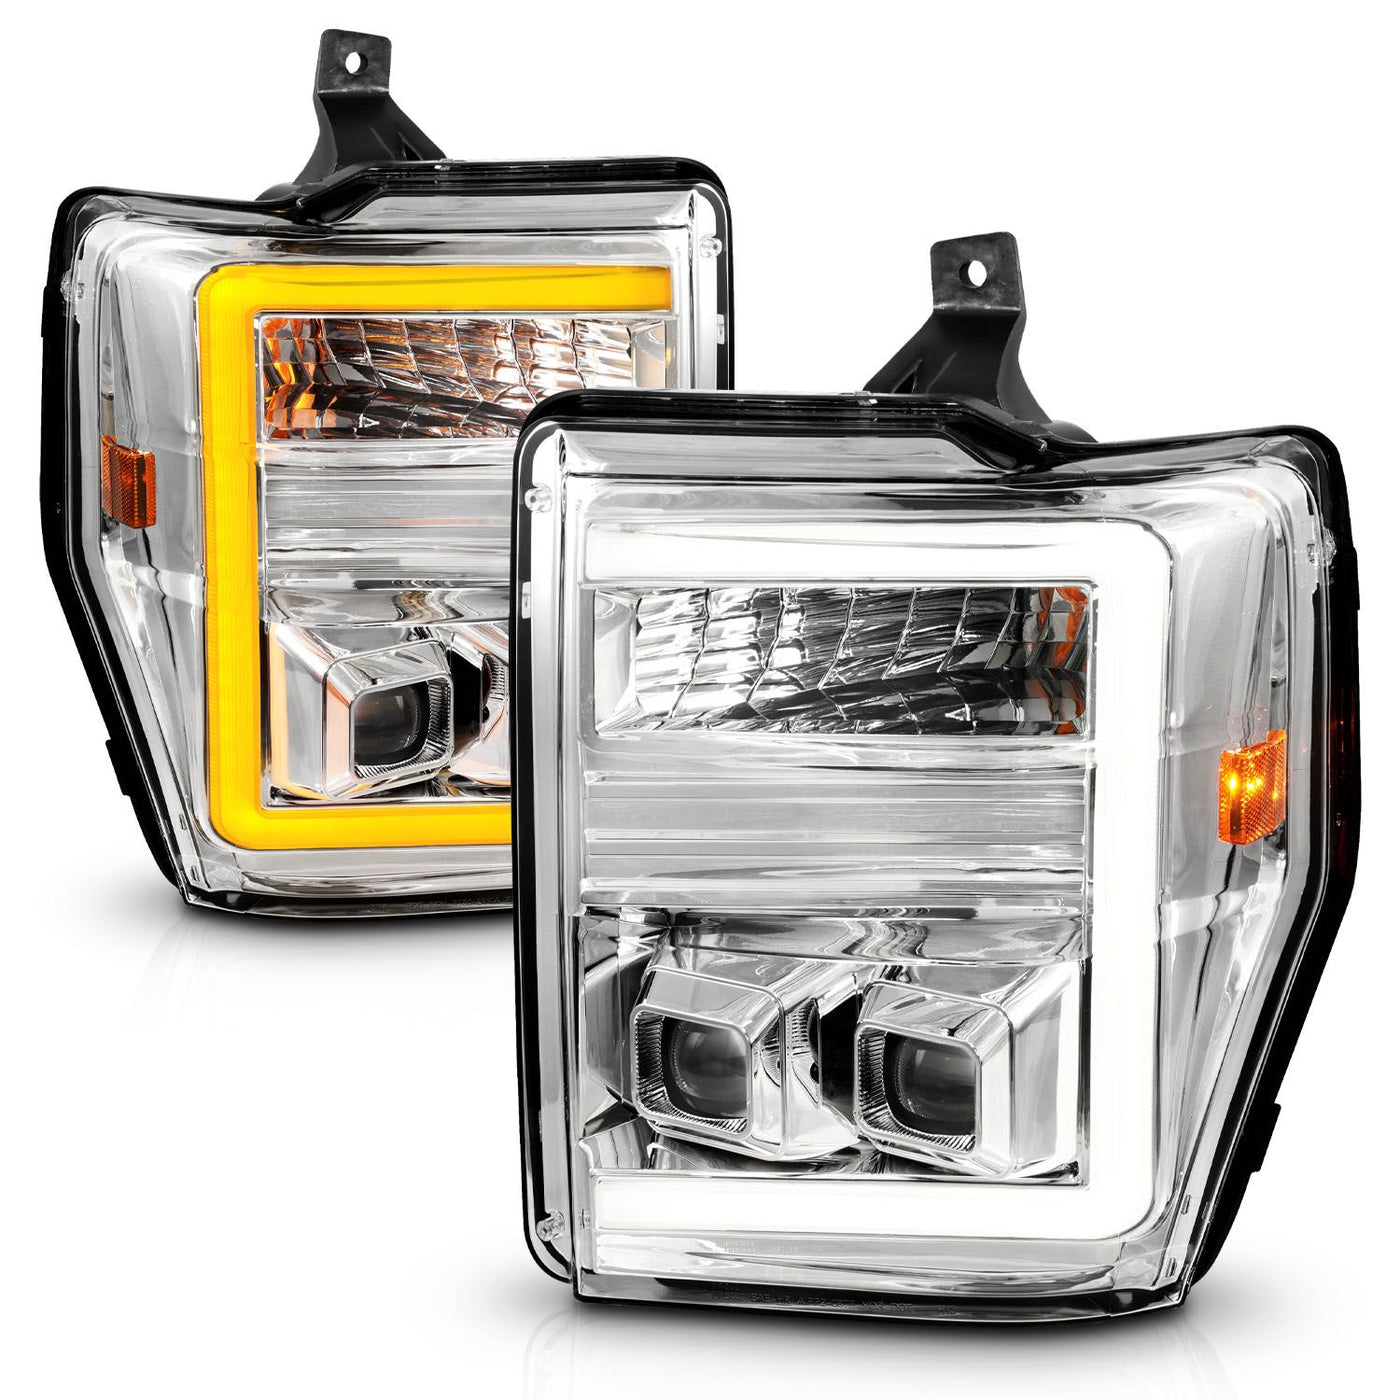 Ford Projector Headlights, Ford Super Duty Headlights, Ford 08-10 Headlights, Projector Headlights, Plank Style Projector Headlights, Chrome Projector Headlights, Anzo Projector Headlights